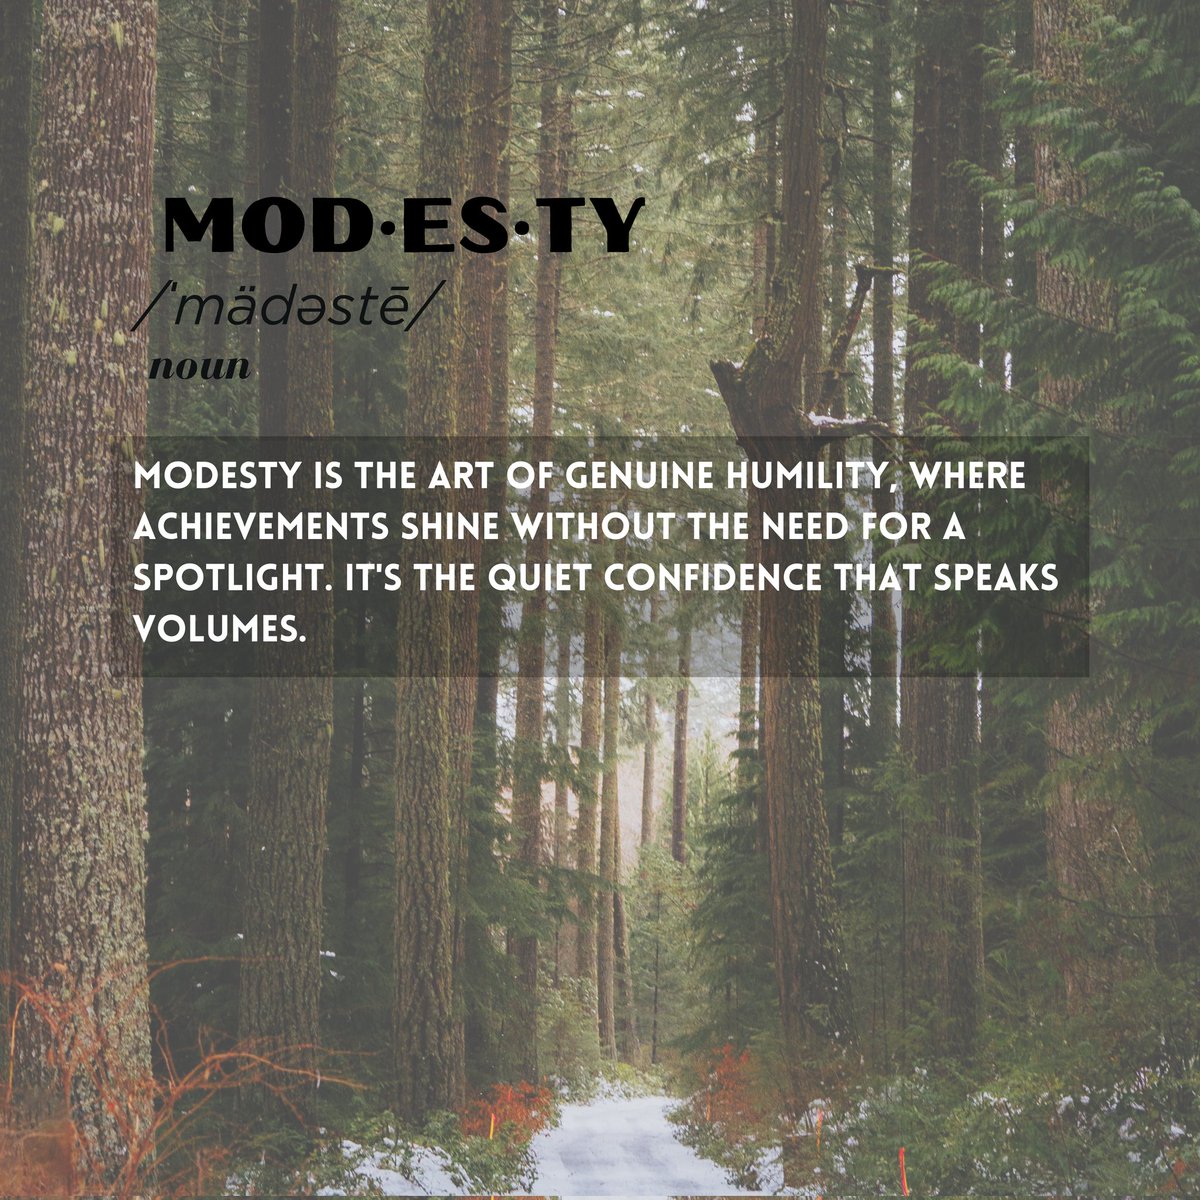 Modesty is the quiet strength that speaks volumes. It's the art of humility, grace, and embracing simplicity. Embrace modesty, for in its understated elegance, you cultivate a genuine and lasting impact. 

#ModestySpeaks #QuietStrength 
#EmbraceSimplicity #HumbleImpact 
#Genuine